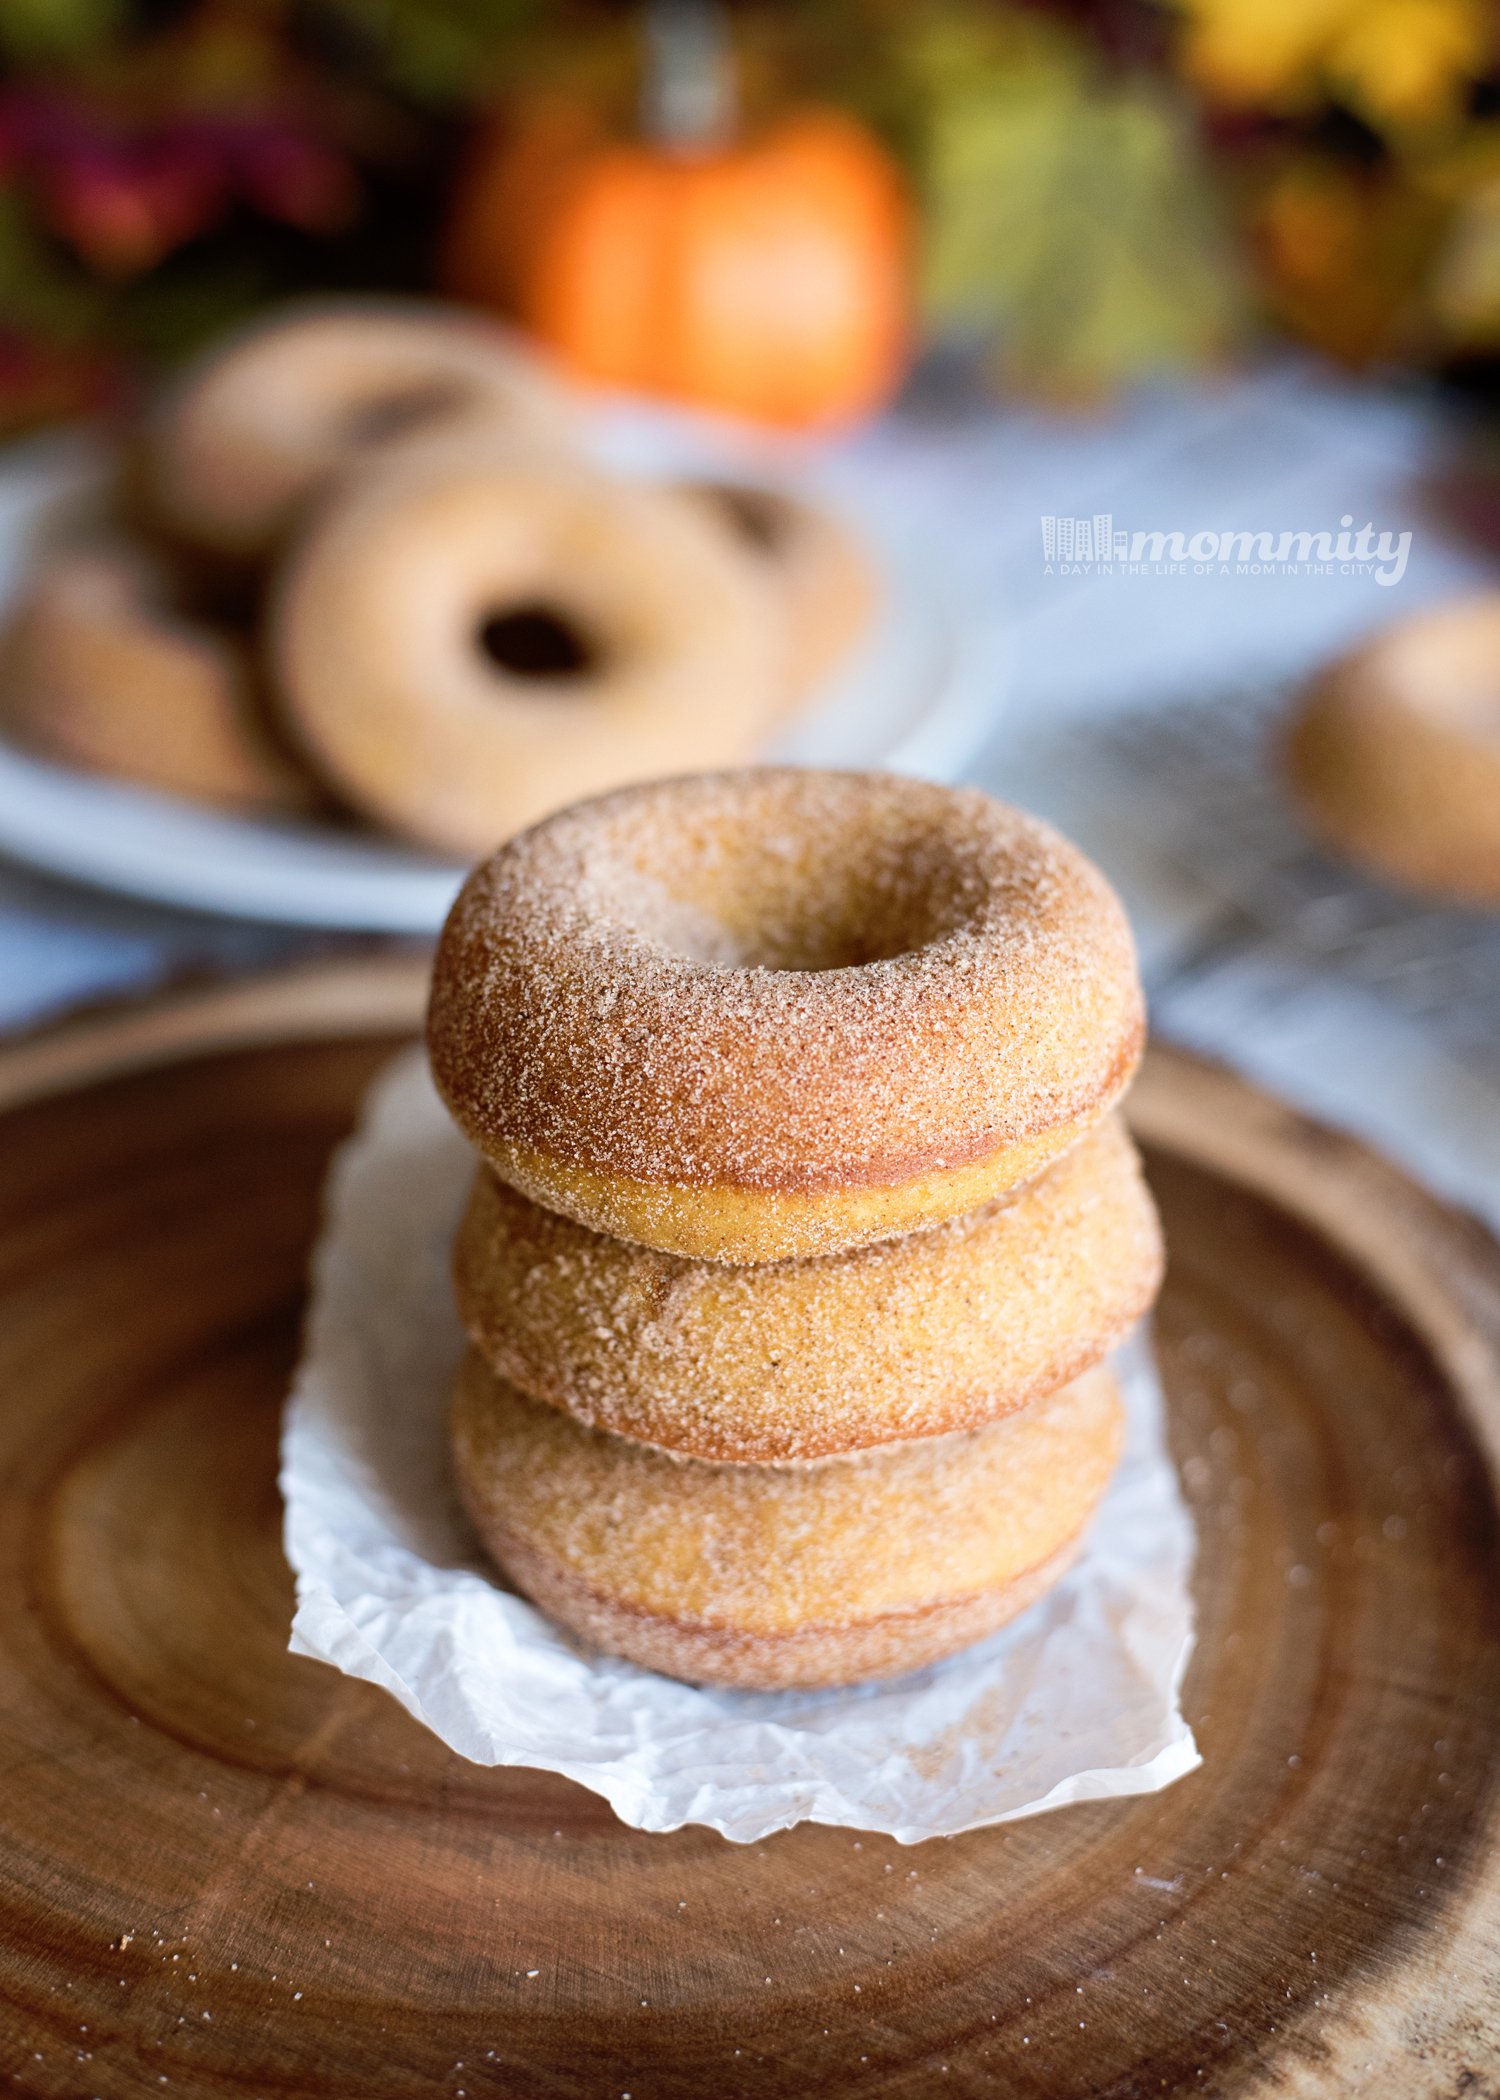 Baked Pumpkin Spice Donuts